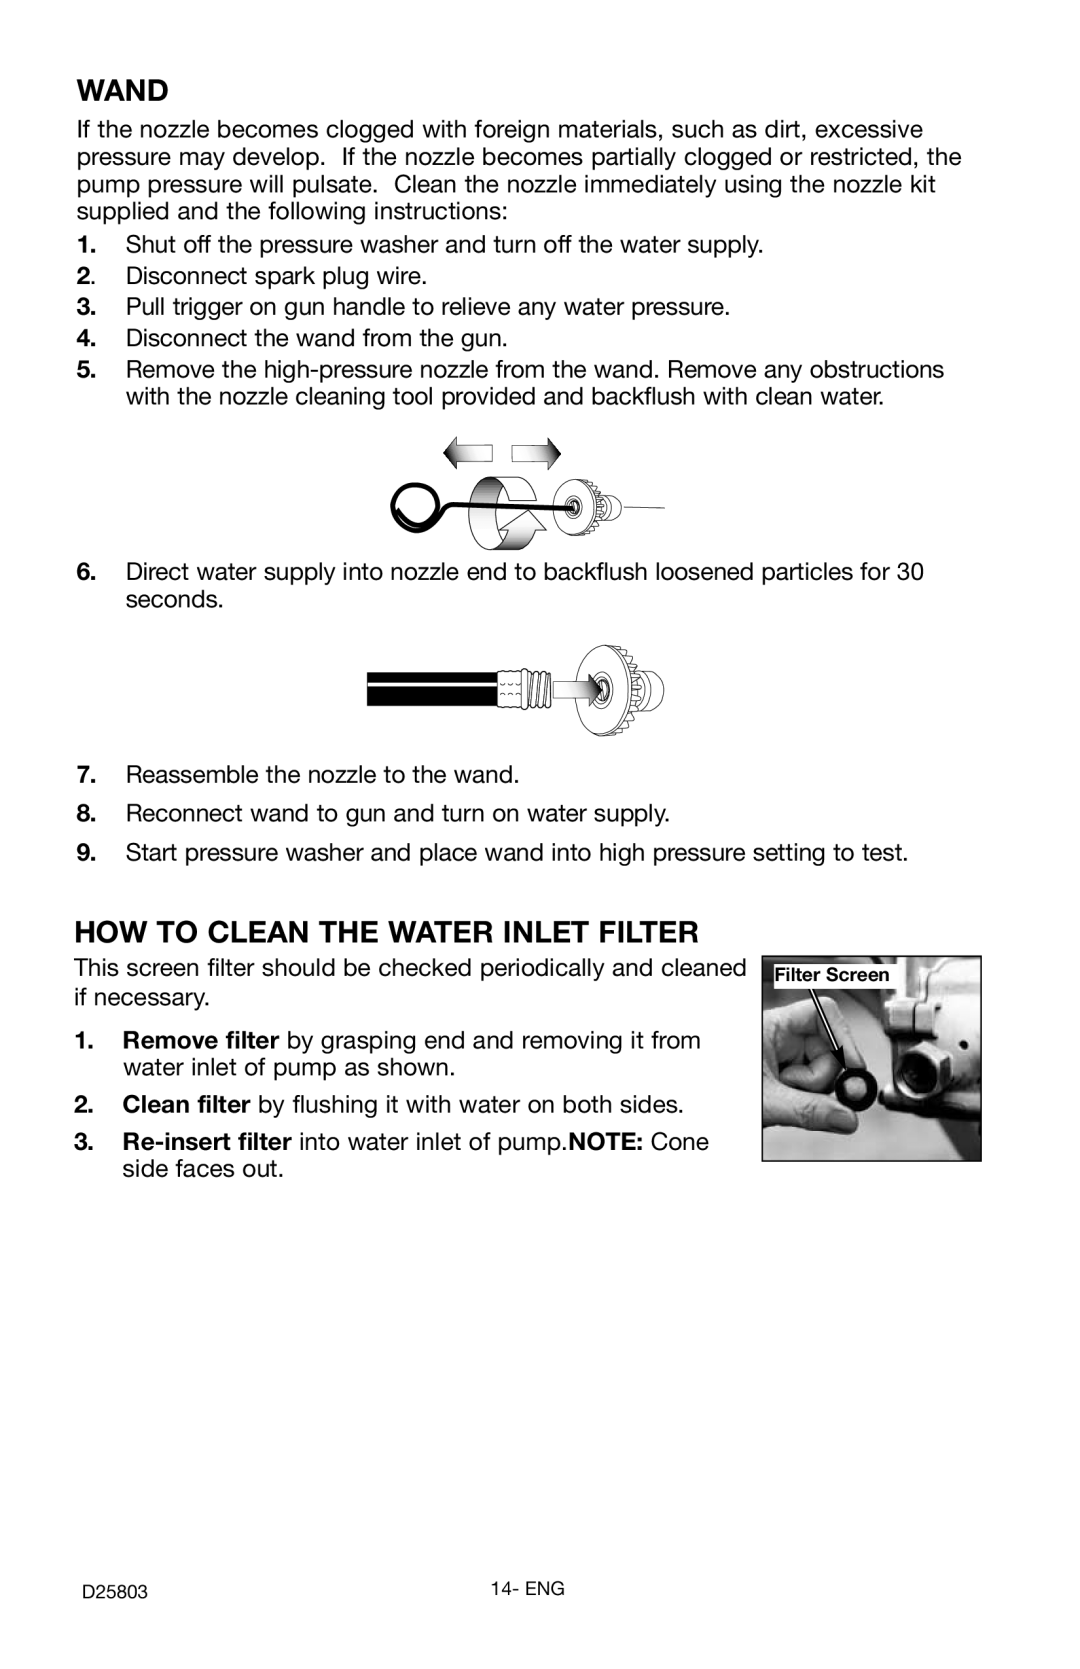 Porter-Cable PCH2401, D25803-025-1 instruction manual Wand, How To Clean The Water Inlet Filter 